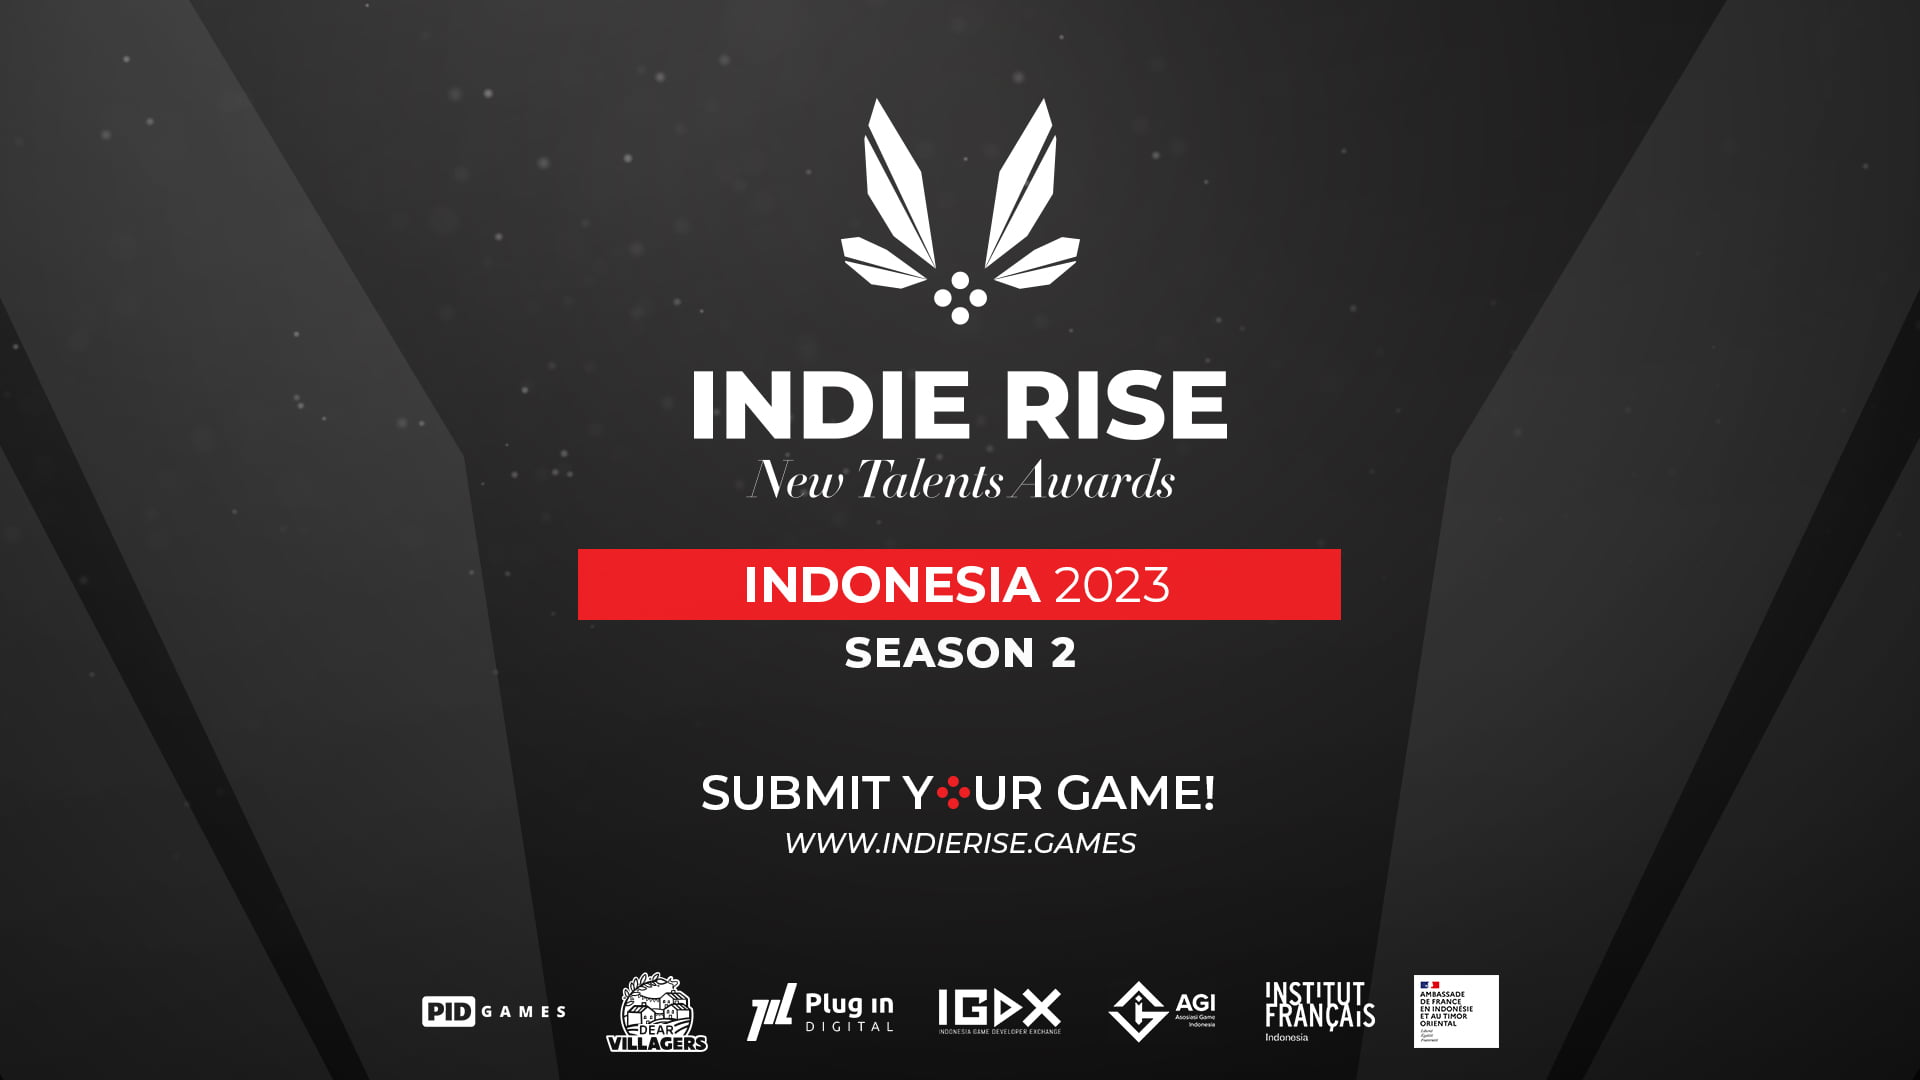 Indie Rise, The New Talent Awards 2023